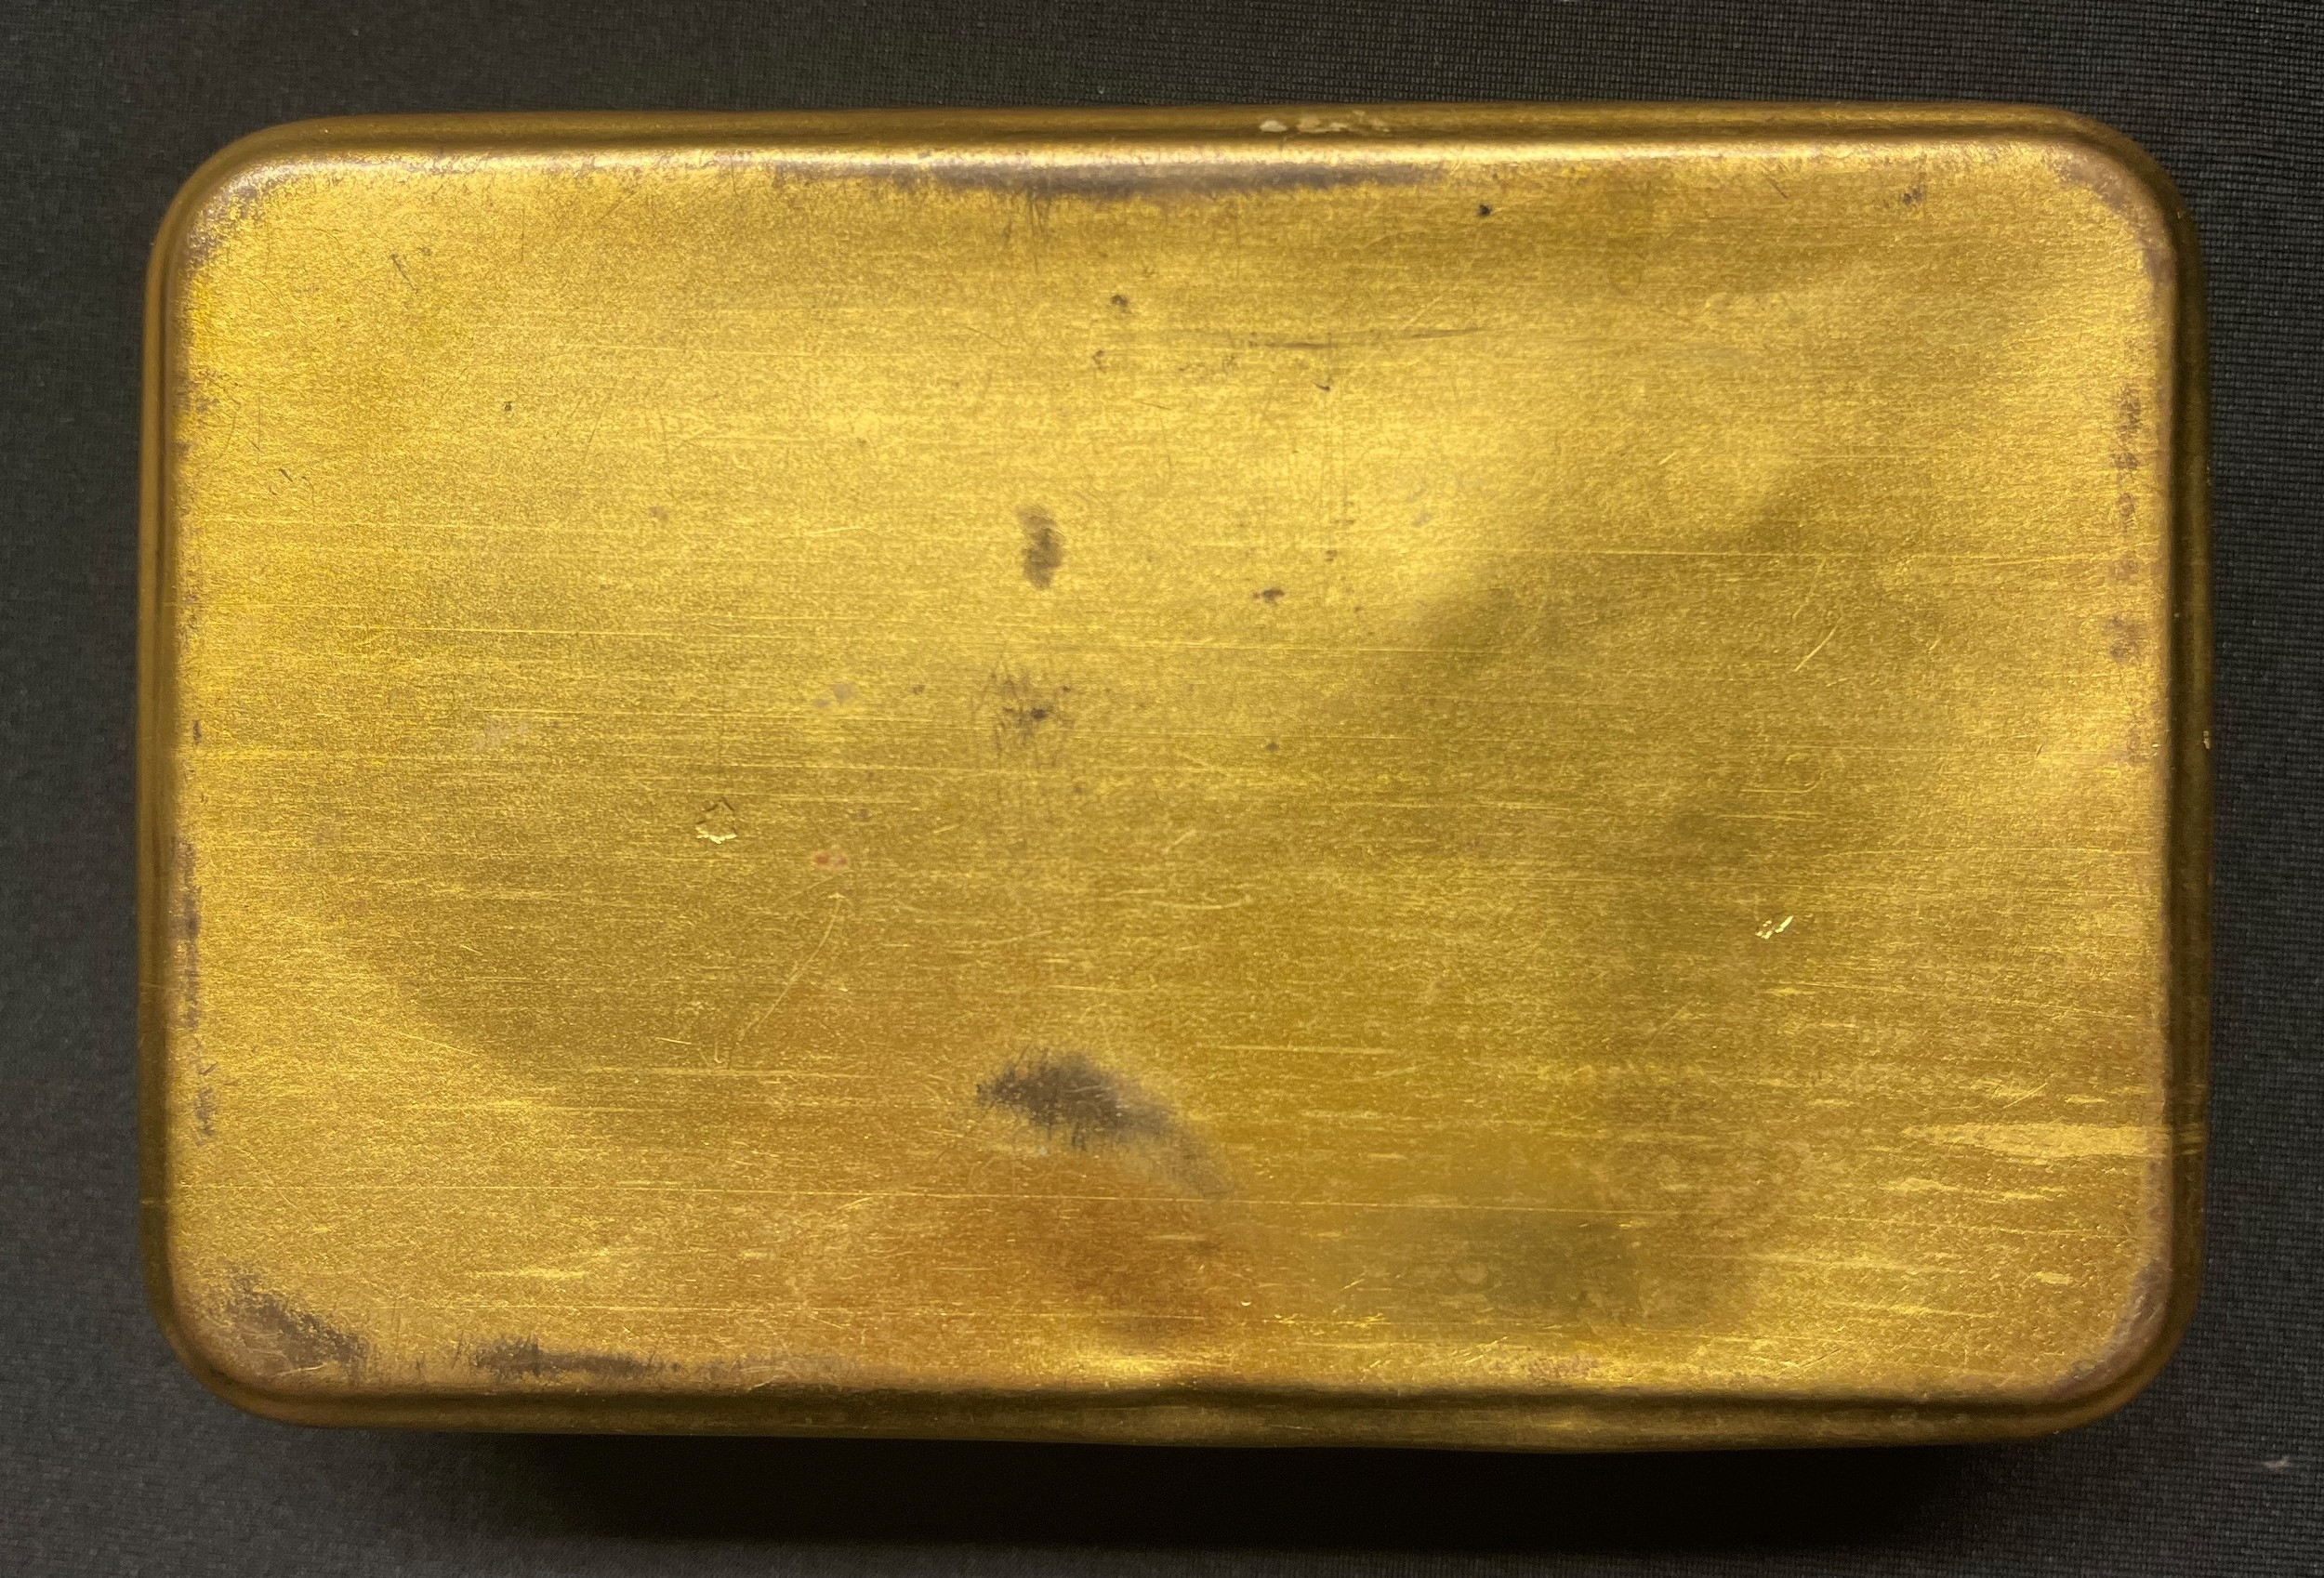 WW1 British Princess Mary's Gift Tin along with a pair of Dorset Regt brass shoulder titles and - Image 4 of 5